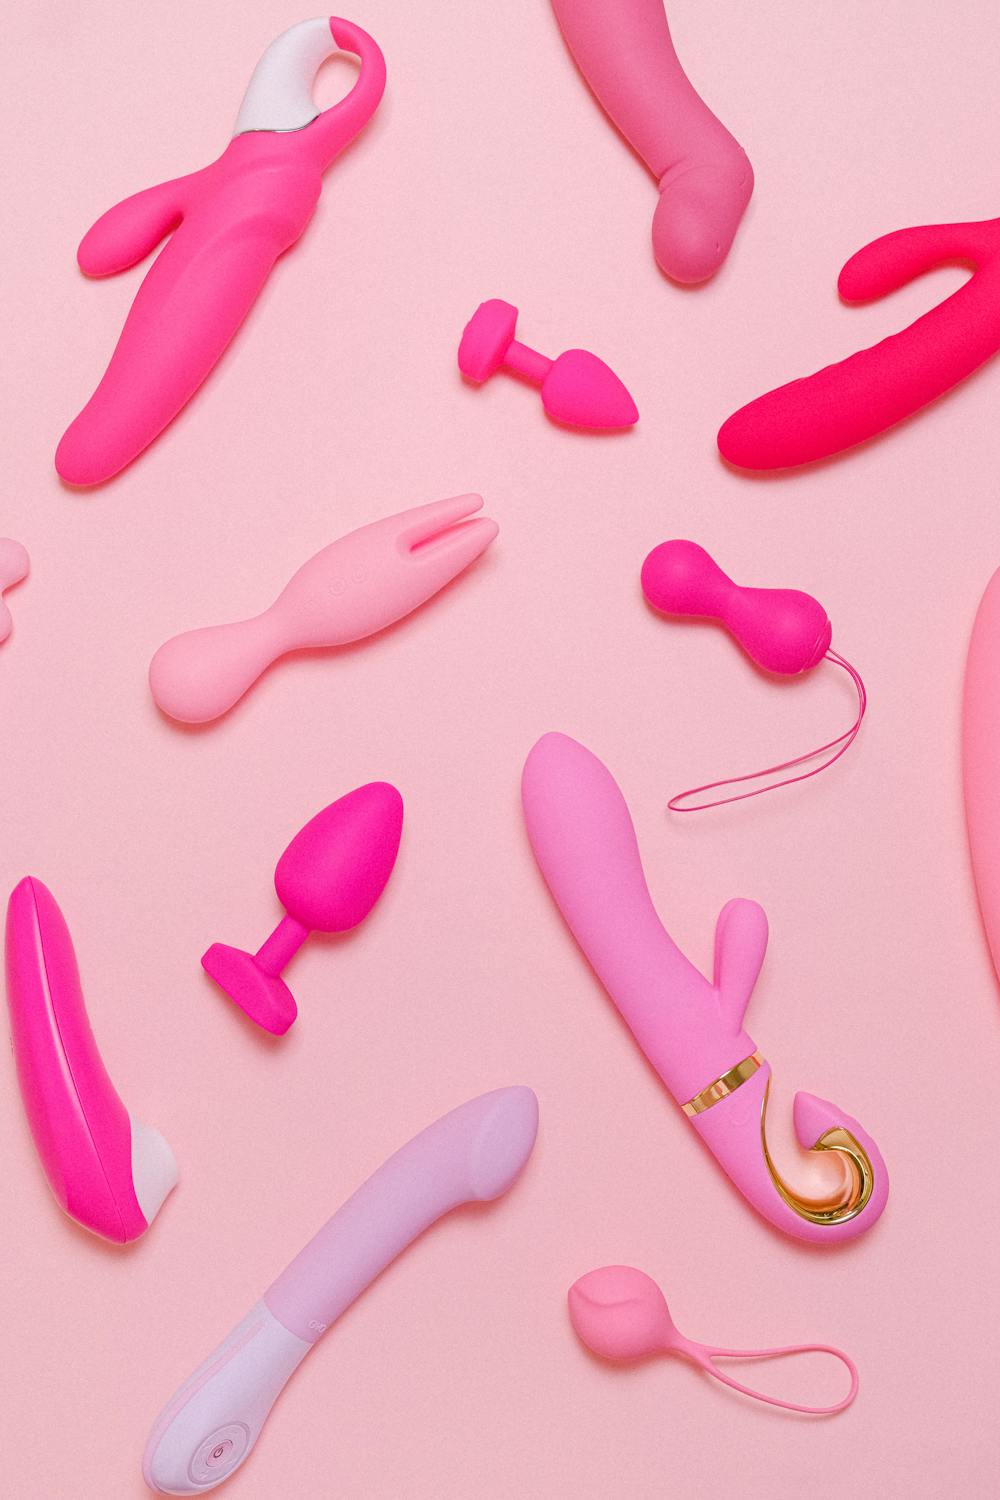 A variety of pink sex toys. 